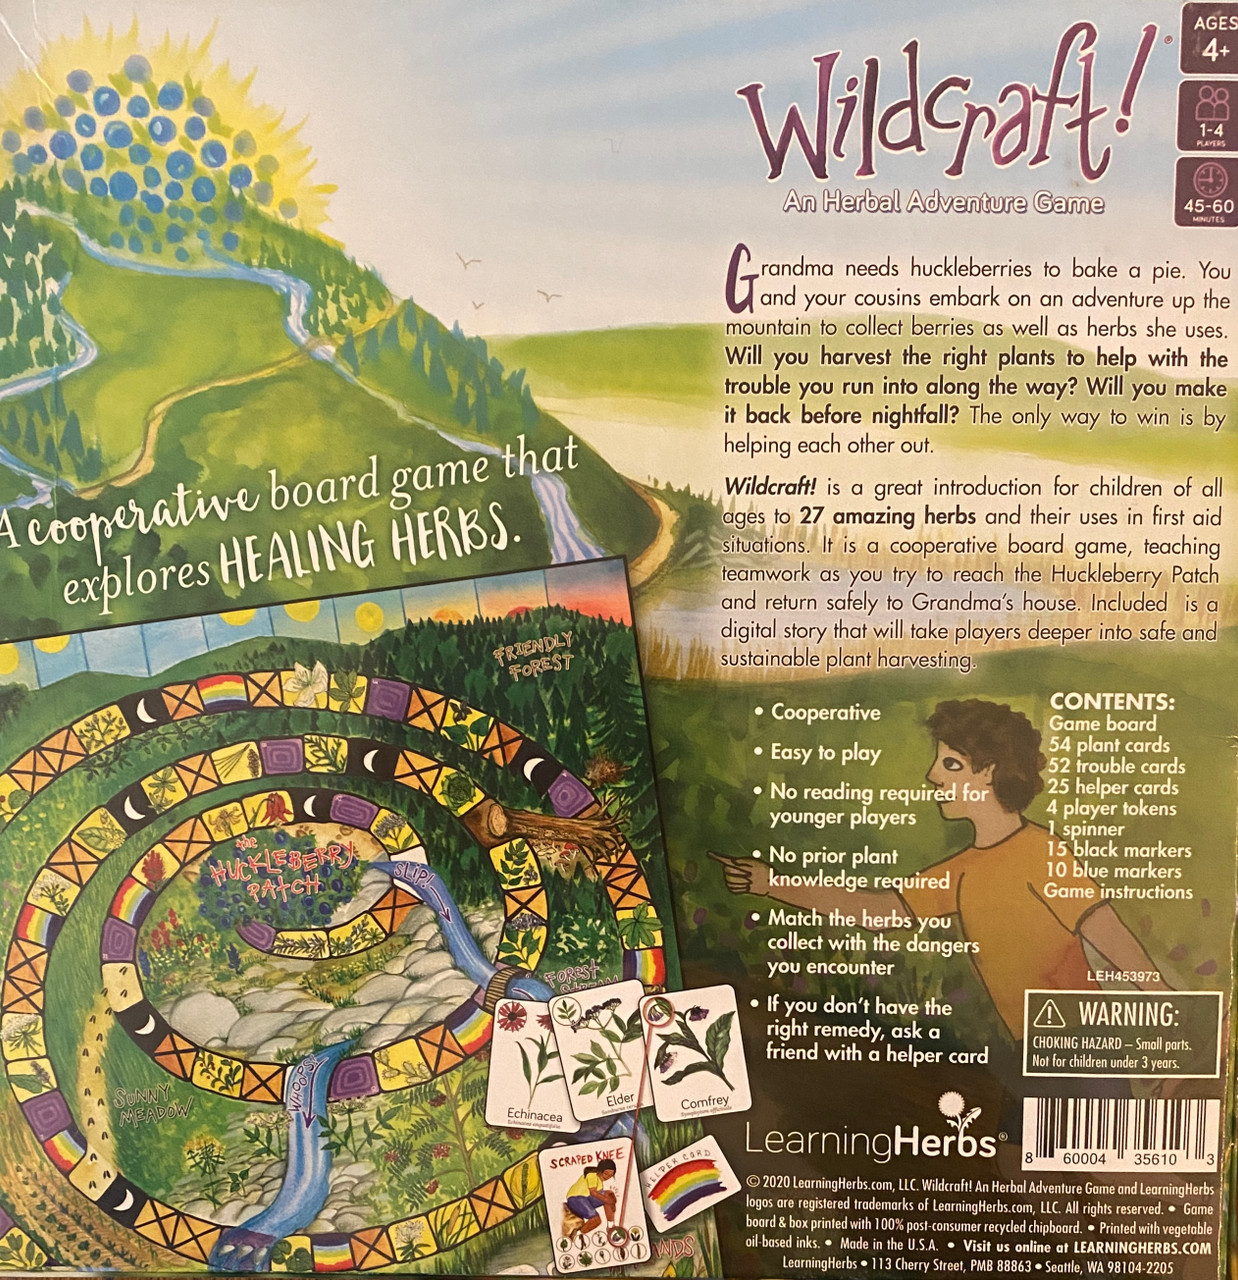 Wildcraft An Herbal Adventure Game, a cooperative board game by The N